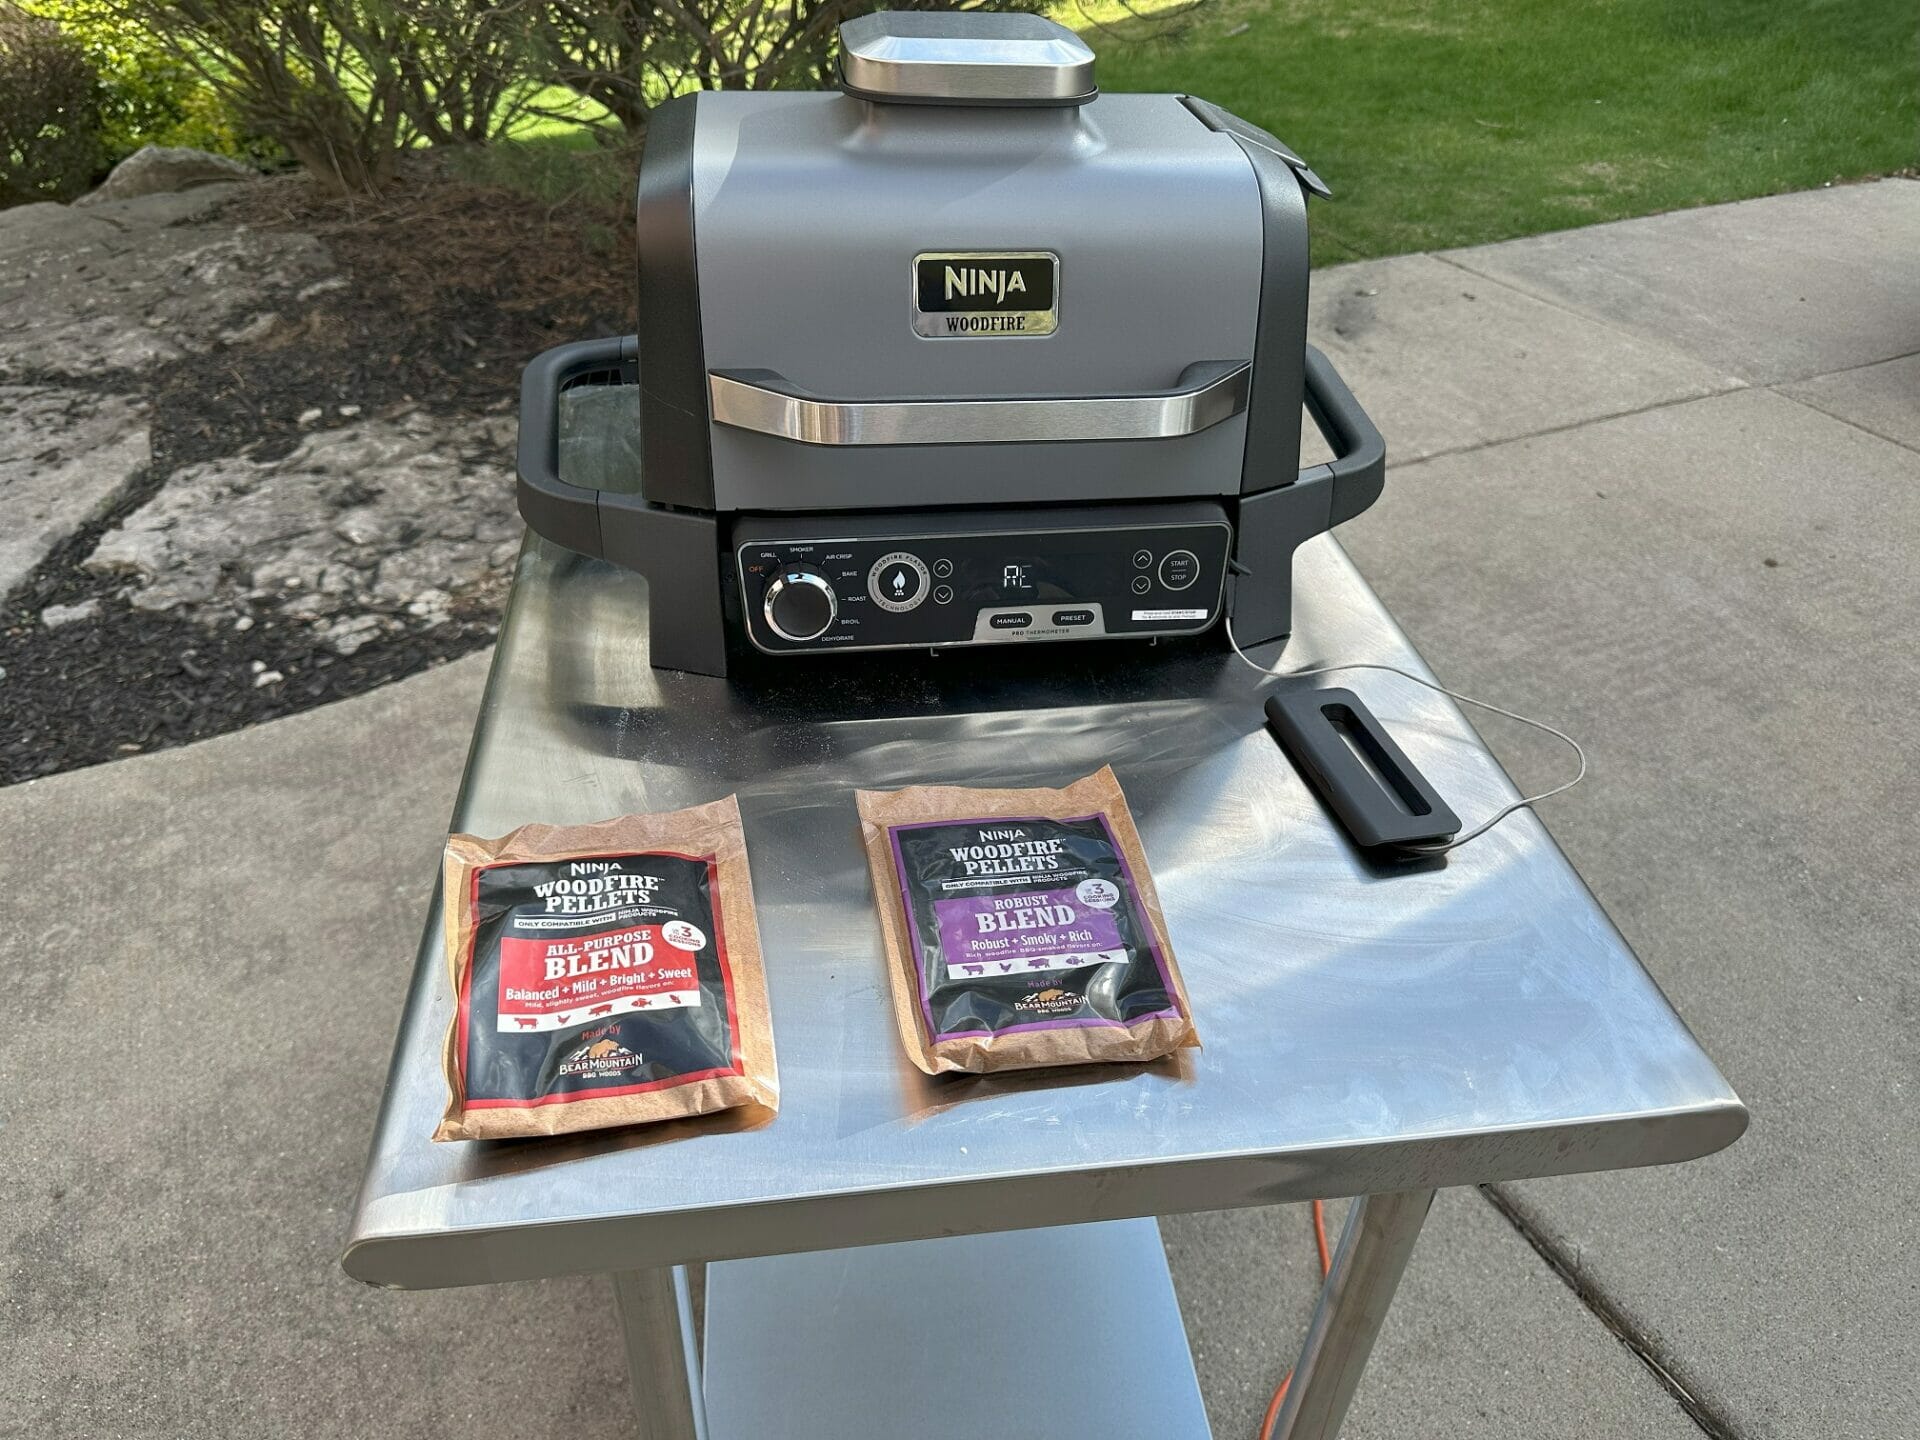 Ninja Woodfire Outdoor Grill - A Review - Grill What You Love